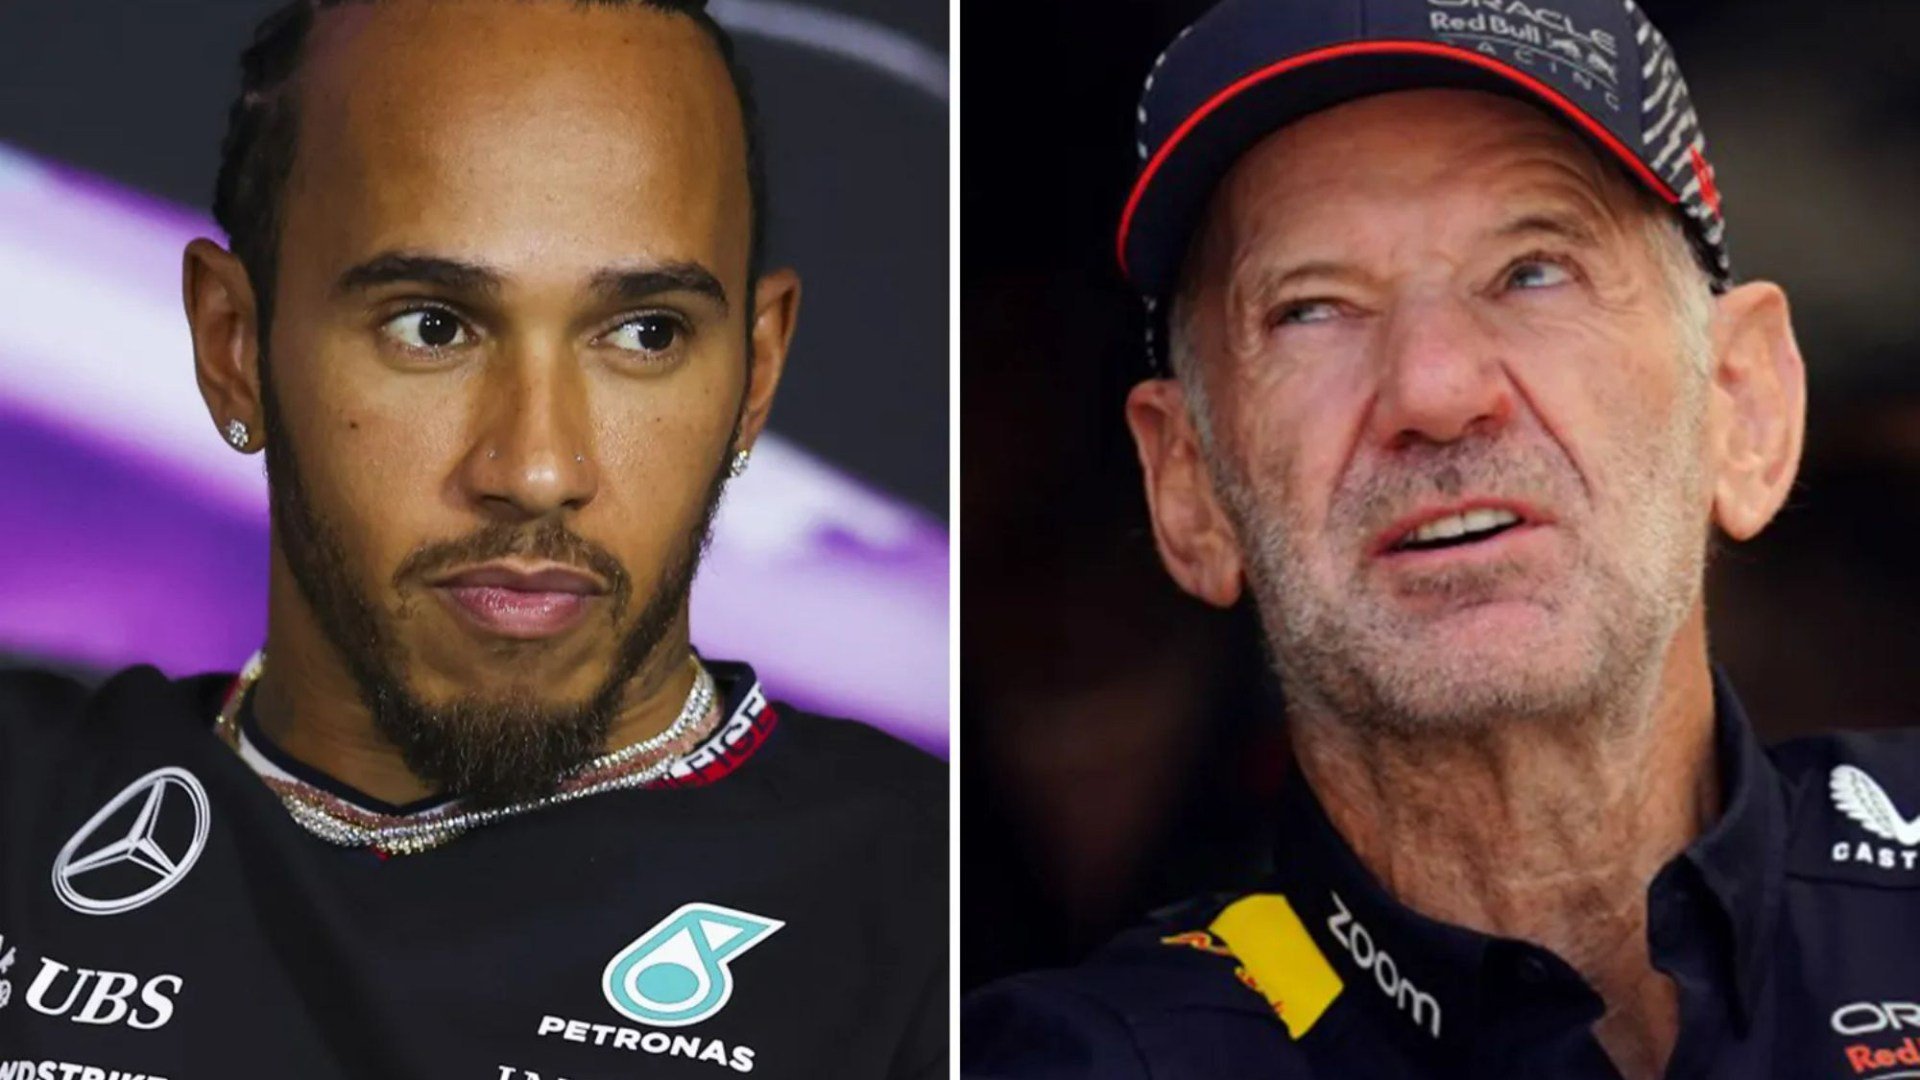 Lewis Hamilton tells Adrian Newey to join him at Ferrari as he rubs salt in the wounds of F1 rival Verstappen & Red Bull